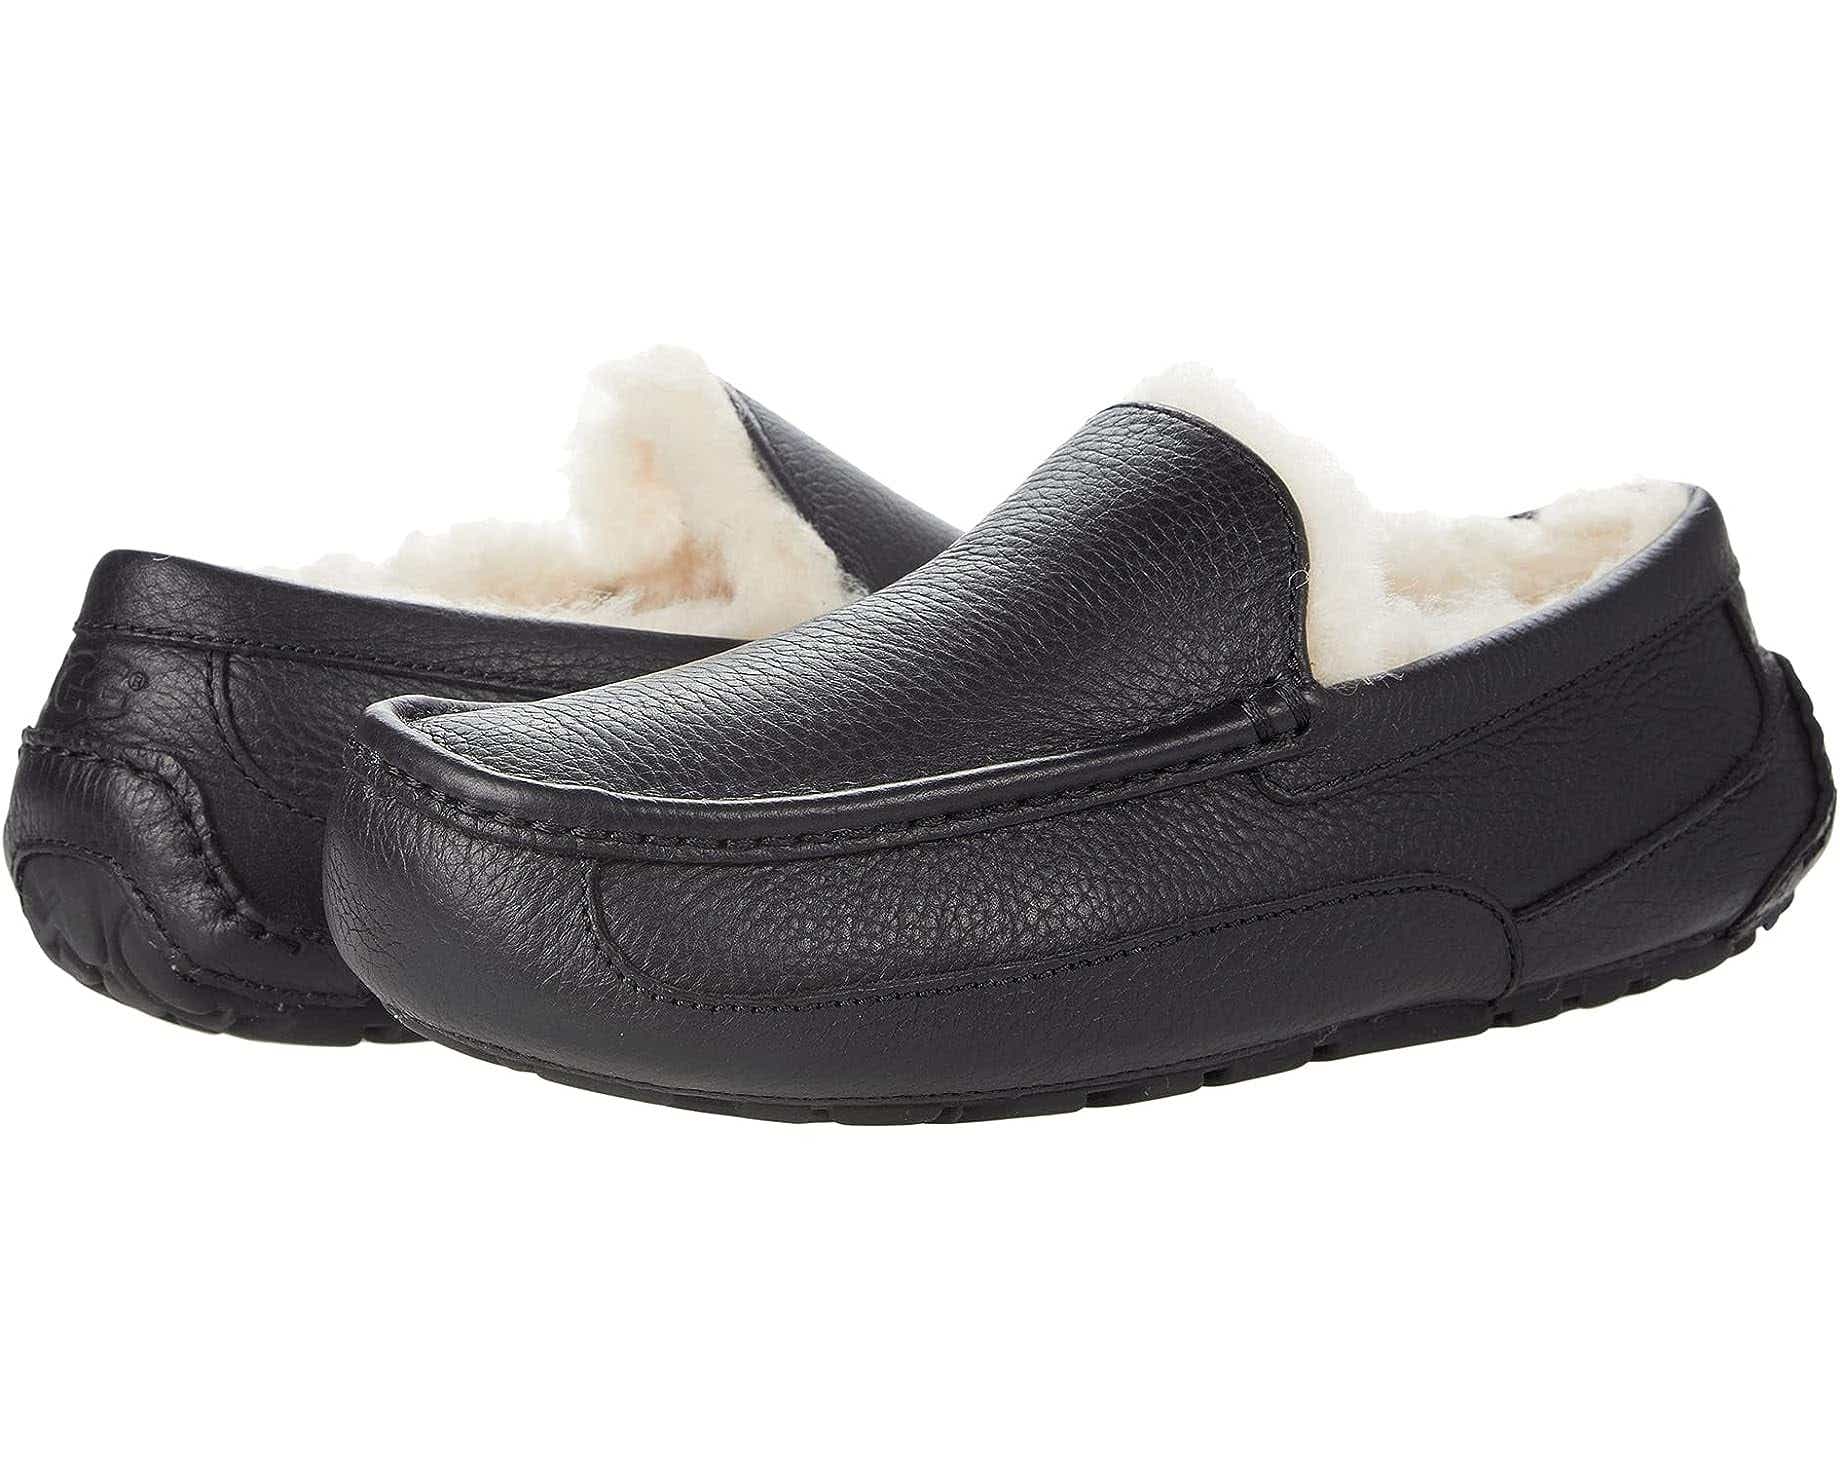 Ugg Ascot Leather Slippers